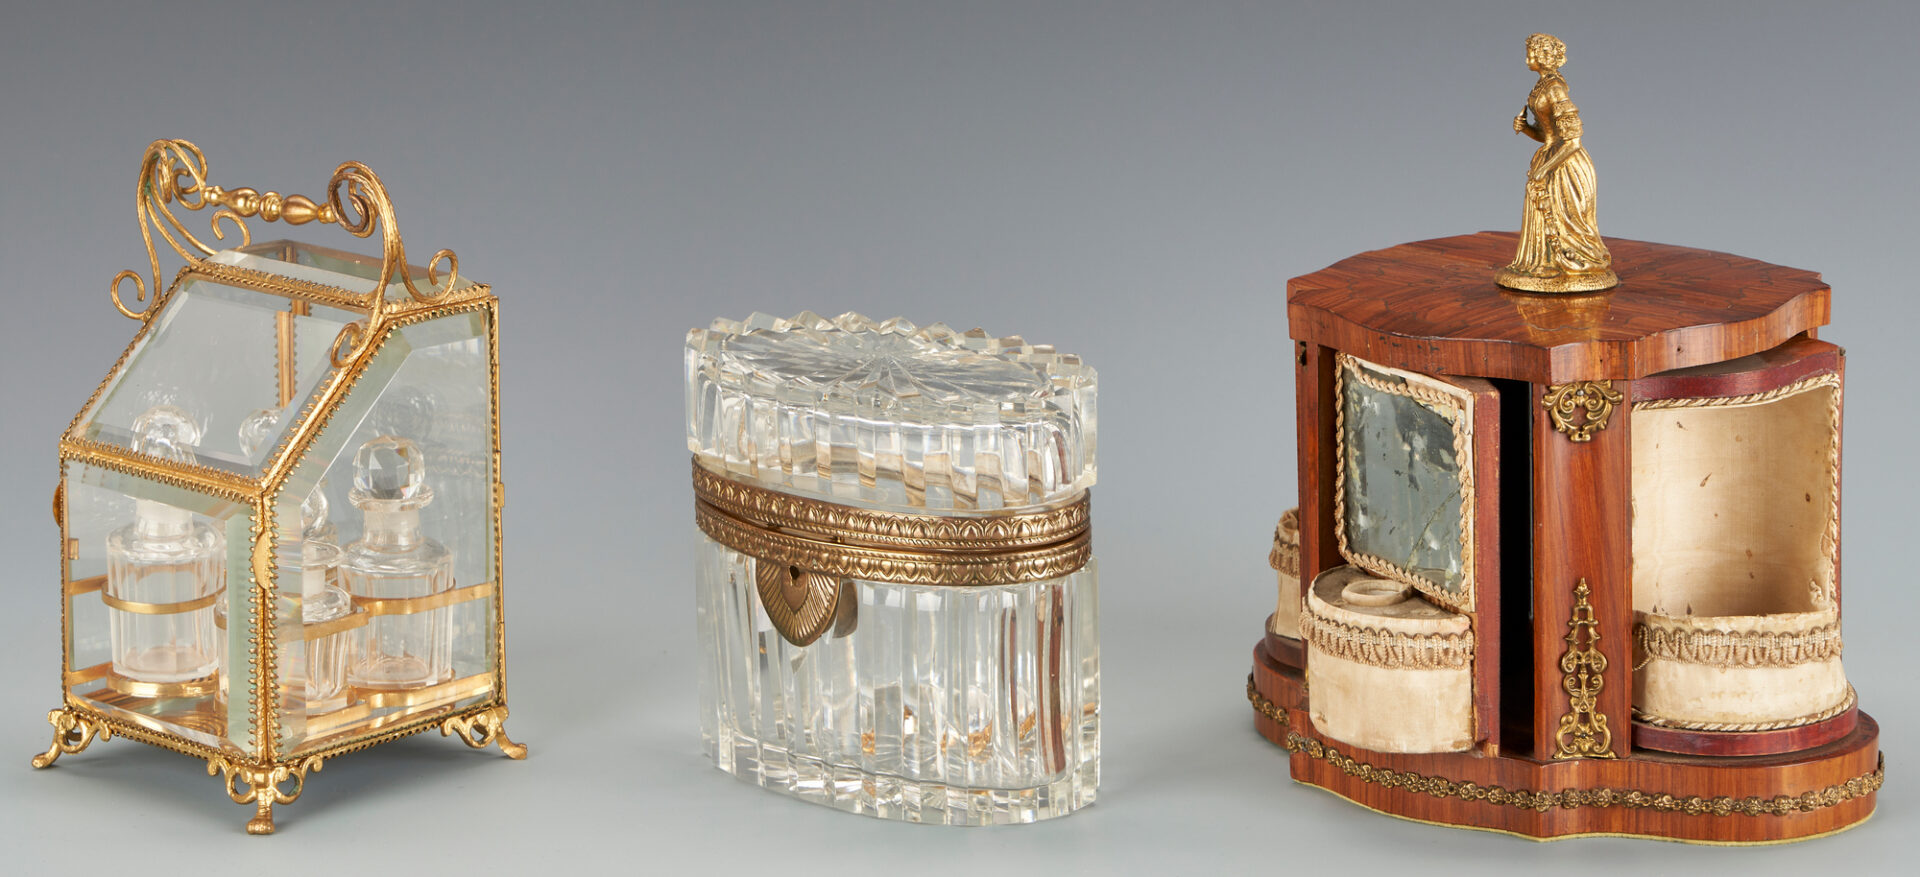 Lot 255: Decorative European Boxes, incl. French Marquetry and Gilt Marble Vanity Mirror, Total 4